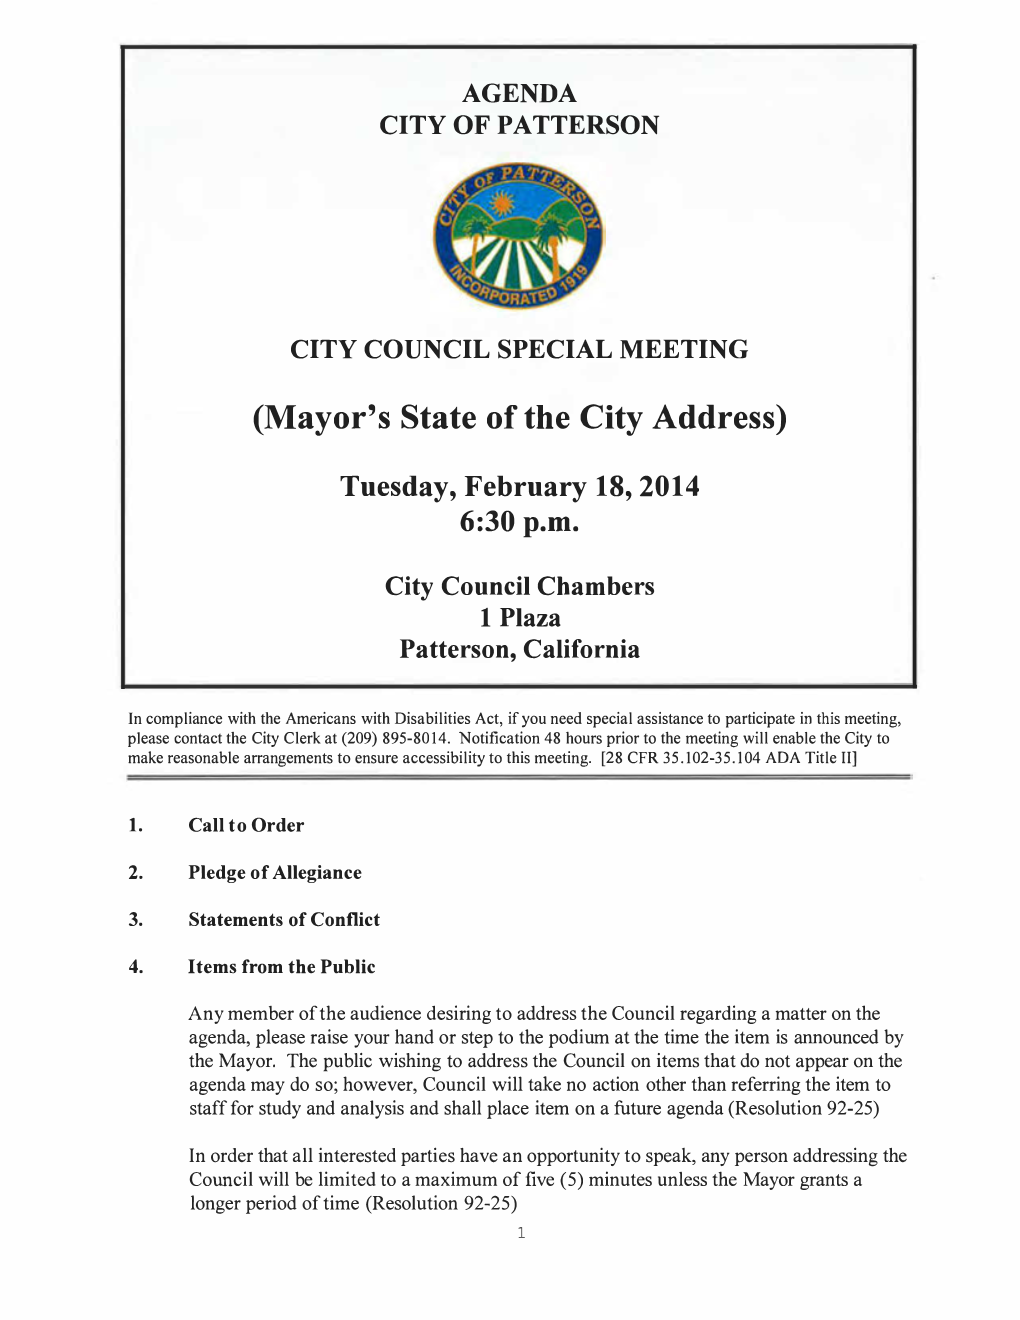 (Mayor's State of the City Address) Tuesday, February 18, 2014 6:30P.M